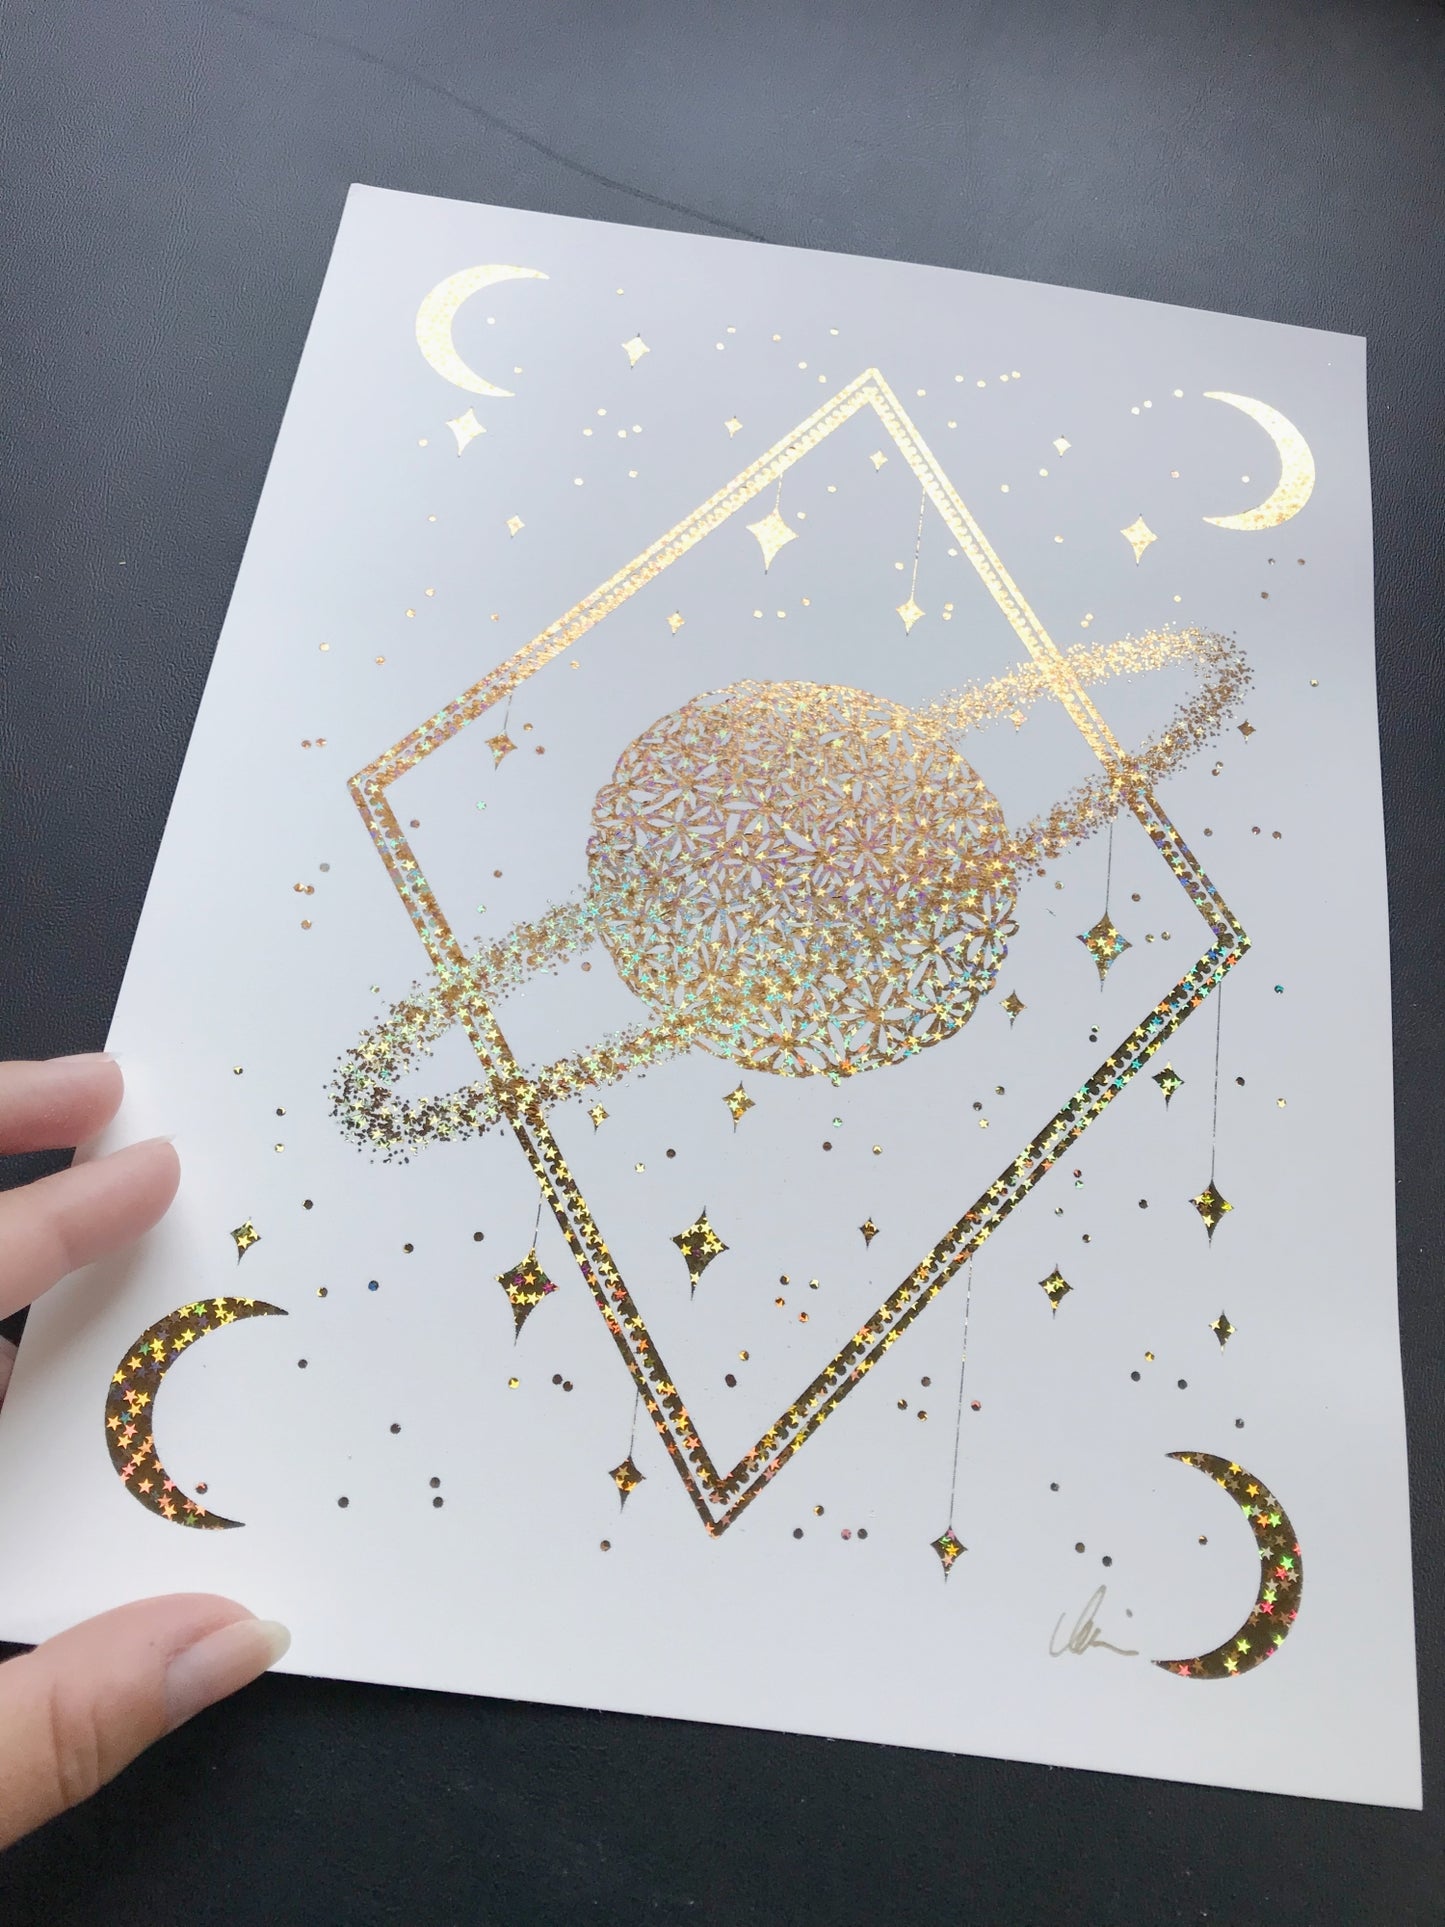 Daisy Galaxy - Signed Gold Holographic Foil Art Print by Marianna Mills - details